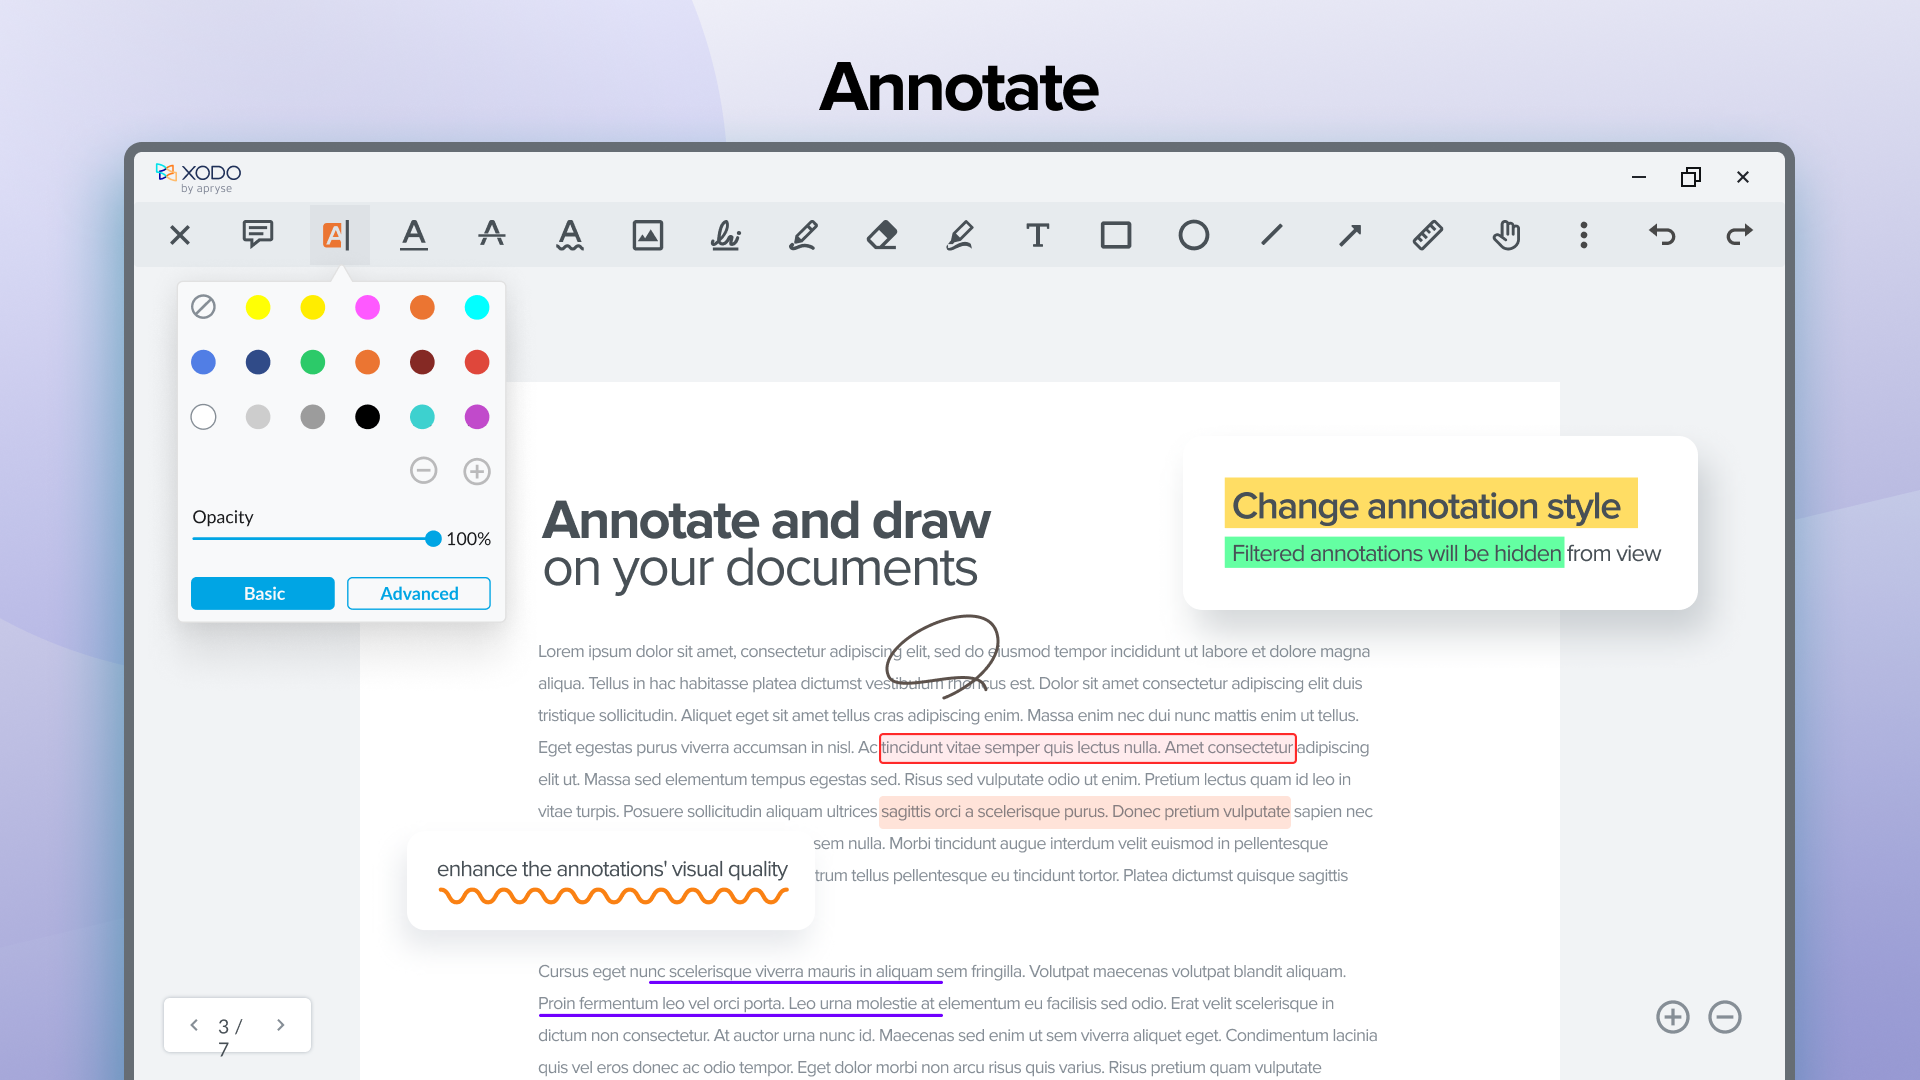 Annotate any PDF. Highlight or strikeout text, insert text, or attach sticky notes. Draw lines, arrows, circles, or simply draw freehand.